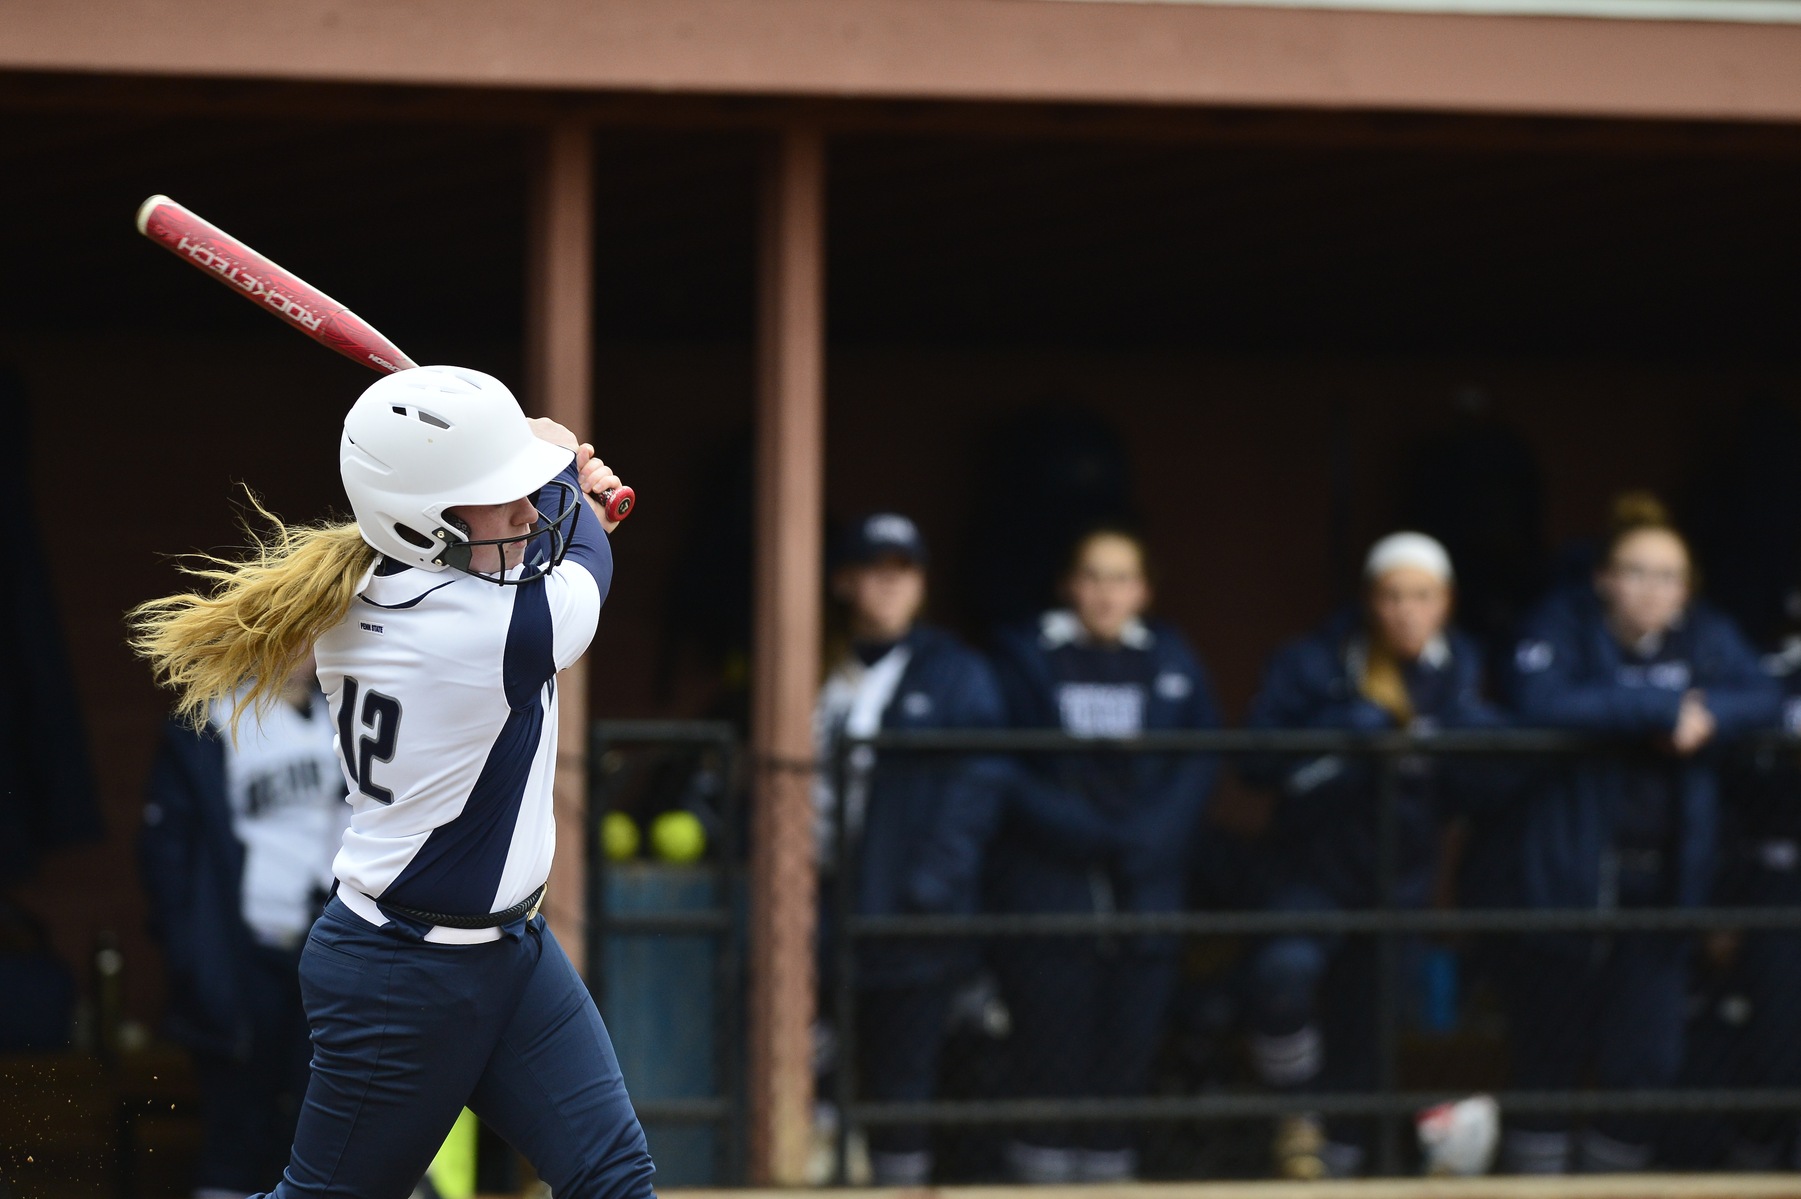 Lions Fall To Christopher Newport In Softball